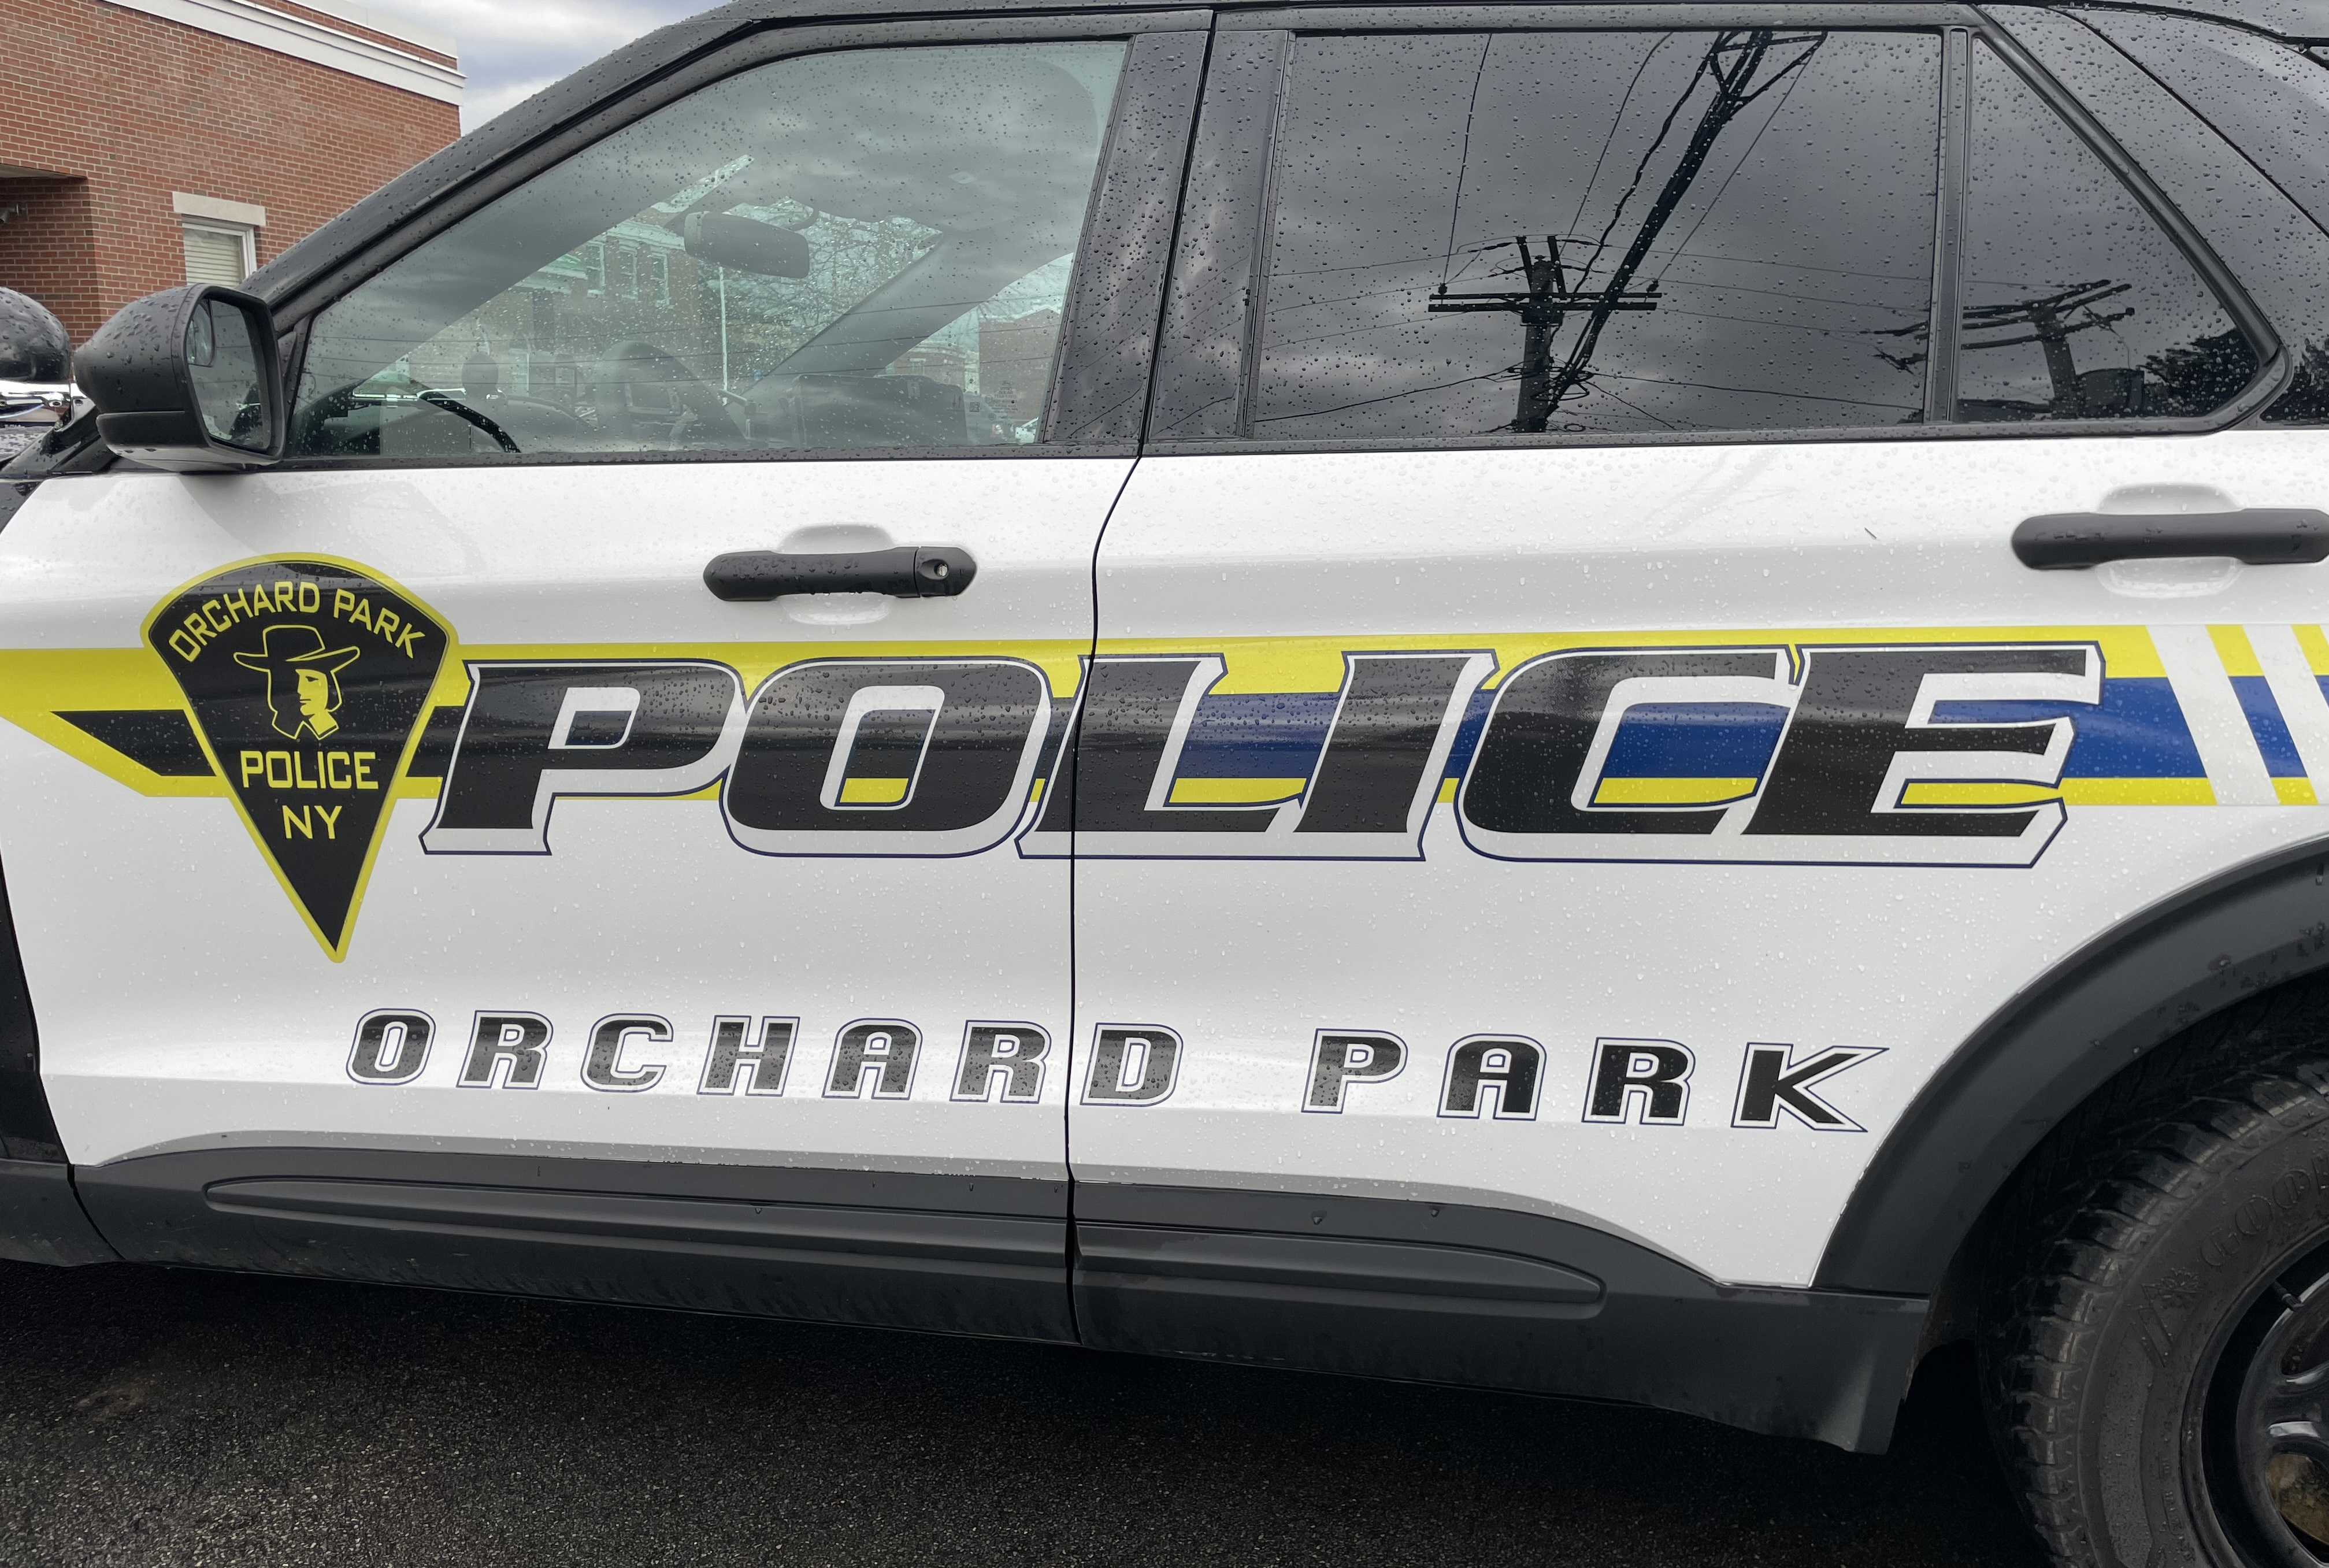 Orchard Park Chief of Police Patrick Fitzgerald ahead of Friday and Saturday's Luke Combs concert at Highmark Stadium